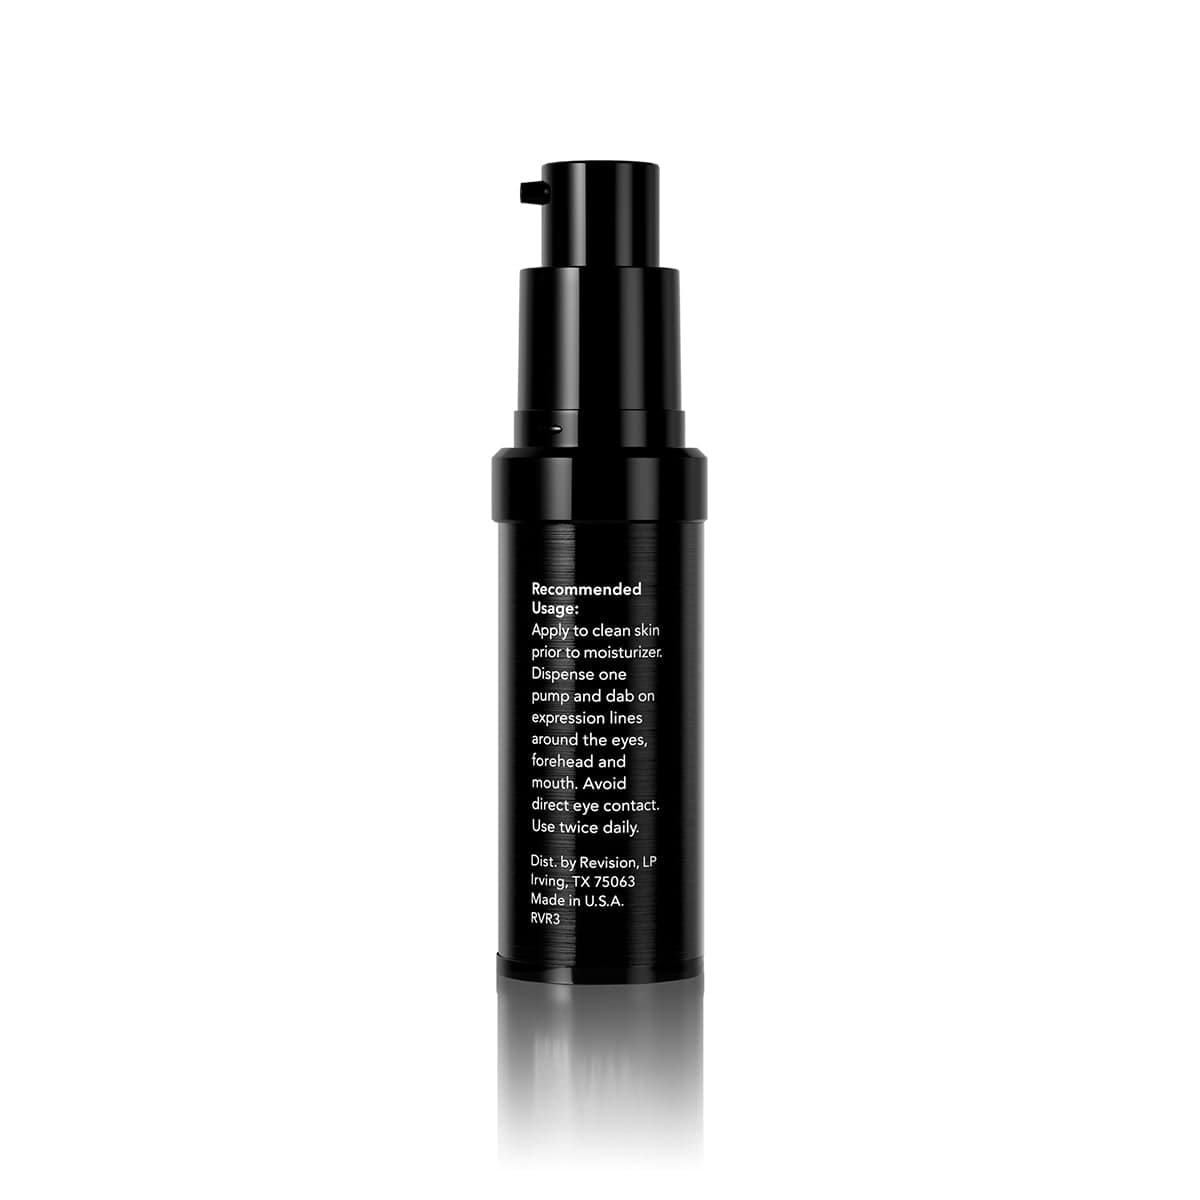 Revox 7- peptide-rich serum for expression lines. Pump Back